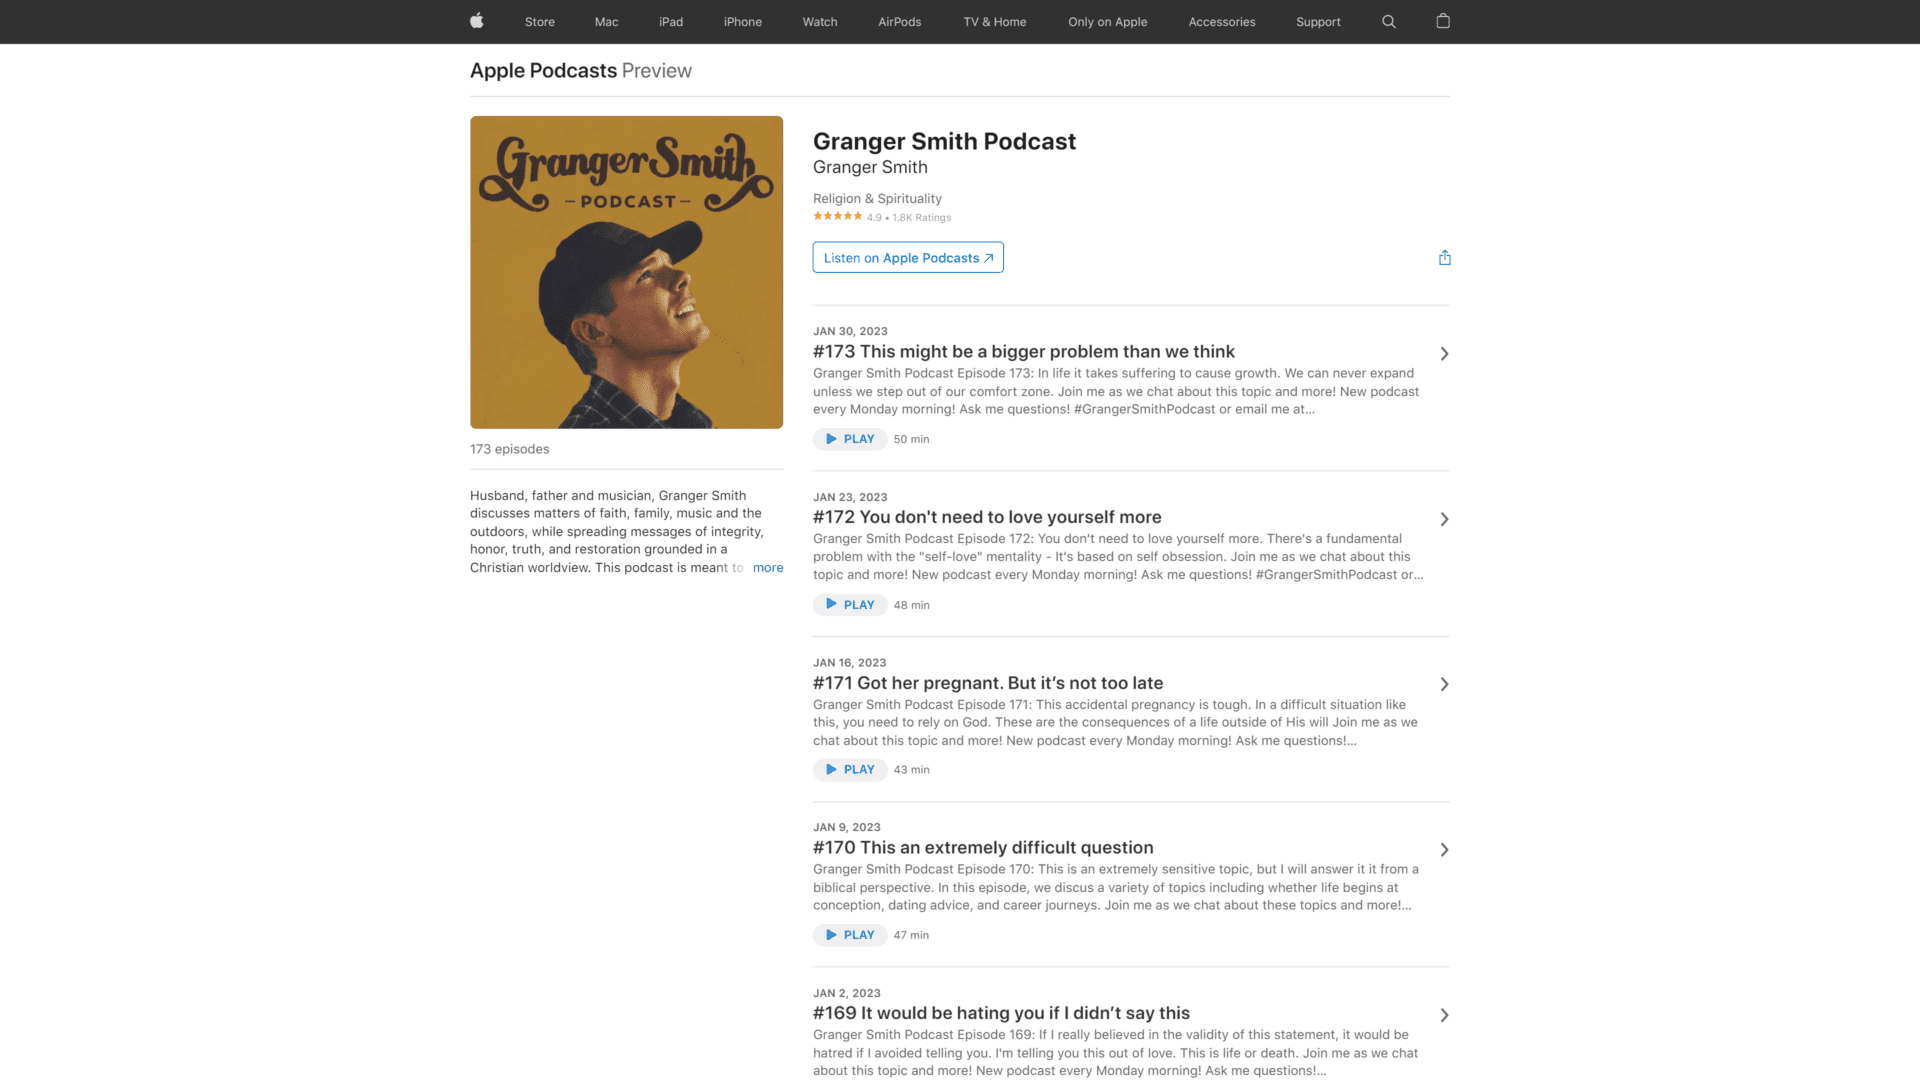 A screenshot of the Granger Smith Podcast homepage